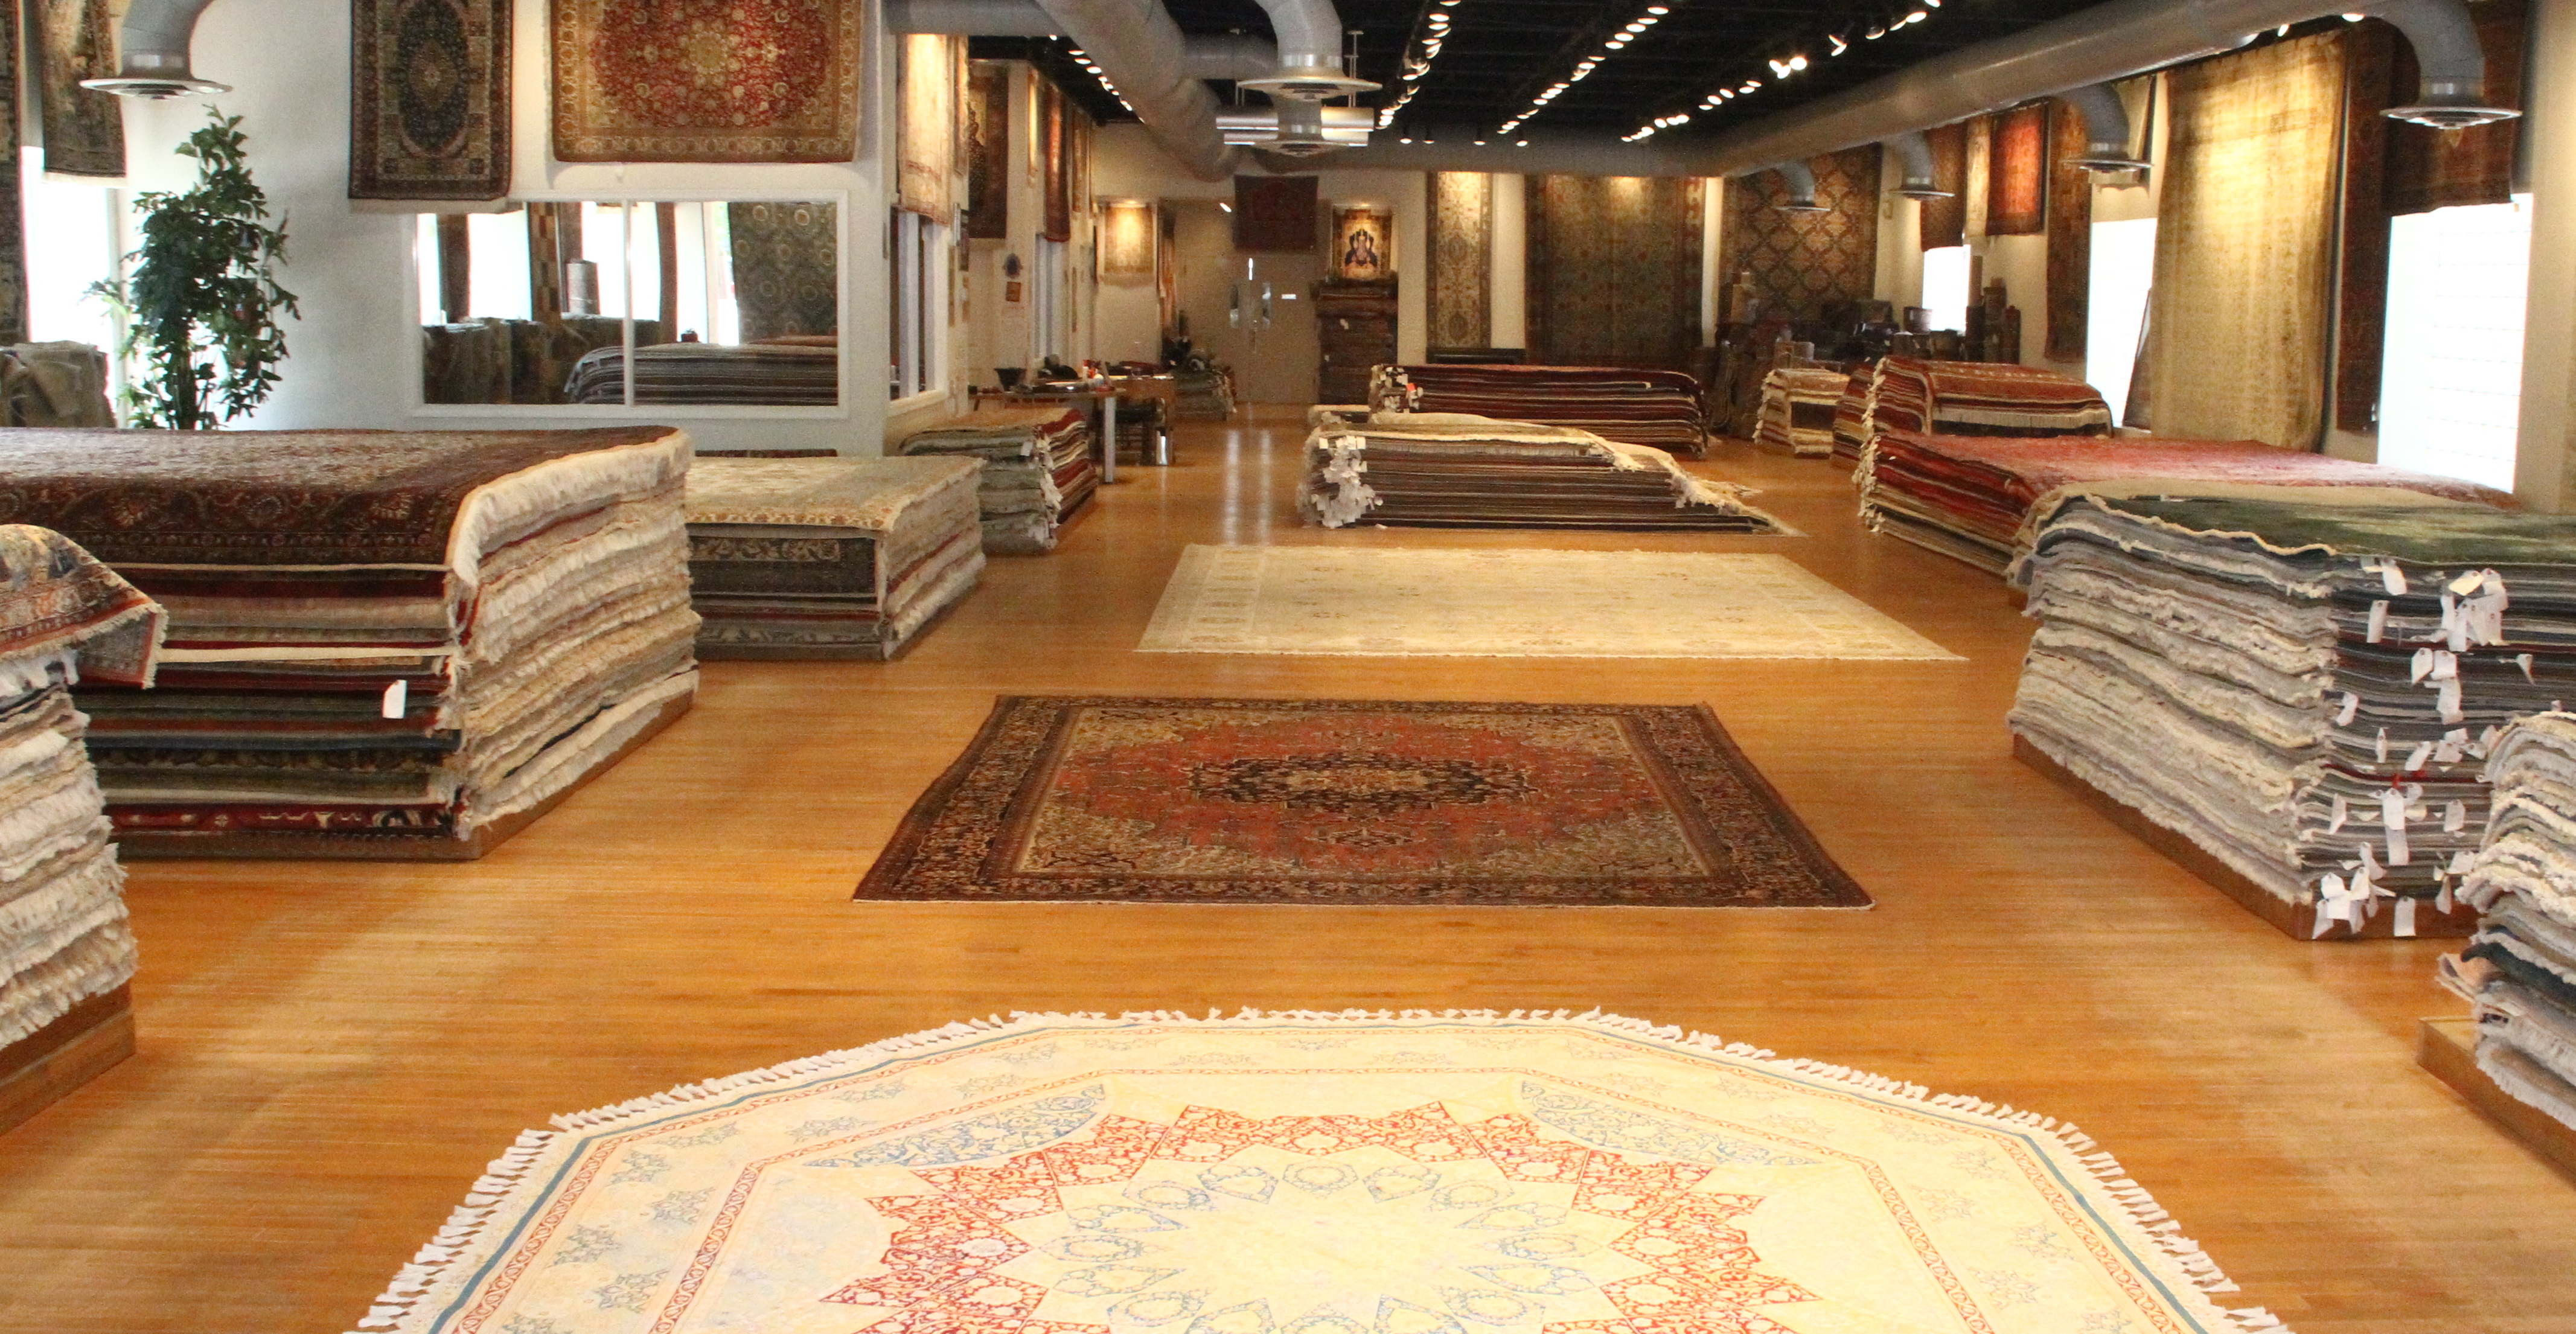 5 Reasons to Restore Oriental and Persian Rugs